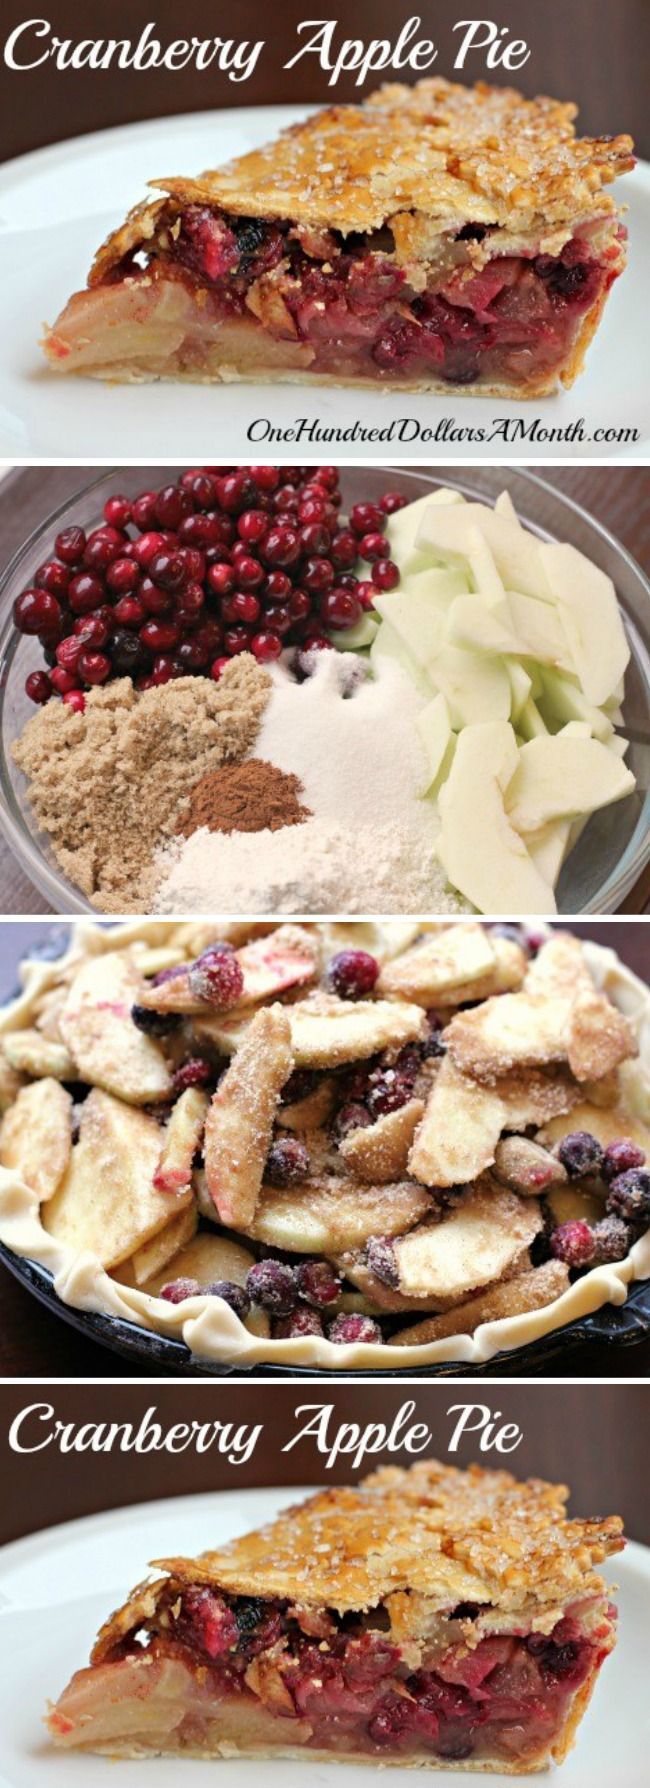 Thanksgiving Dessert Recipes - Cranberry Apple Pie - One Hundred Dollars a Month - Thanksgiving Dessert Recipes - Cranberry Apple Pie - One Hundred Dollars a Month -   19 thanksgiving desserts pie ideas